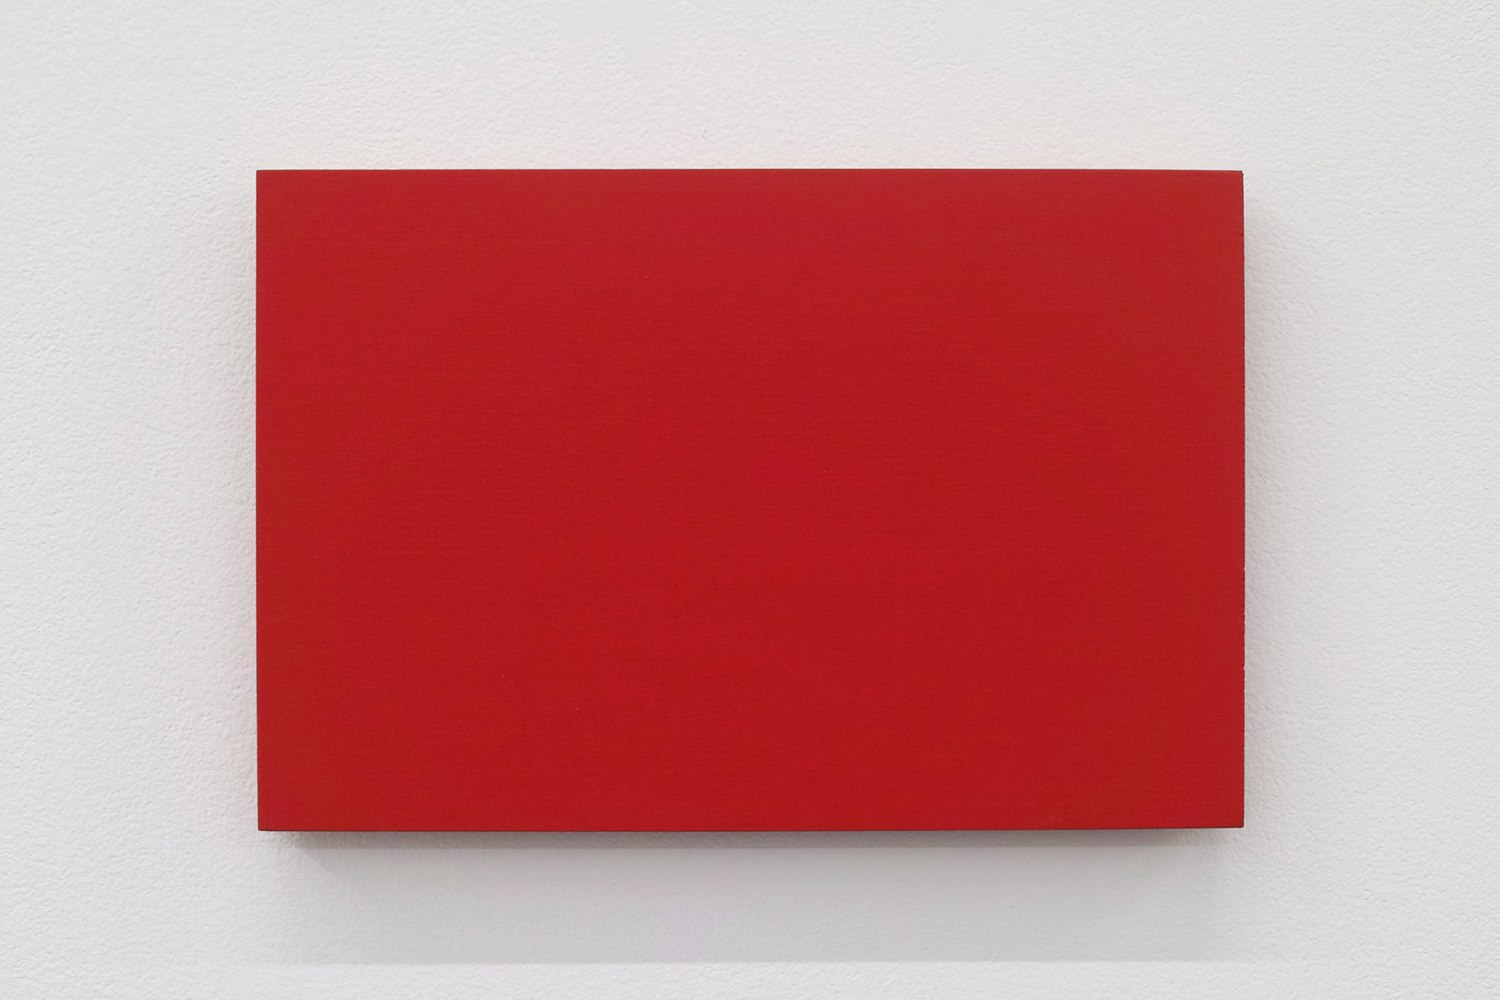 Text No. 572<br>pigment, acrylic on plywood,  150 x 100 x 12 mm,  2006